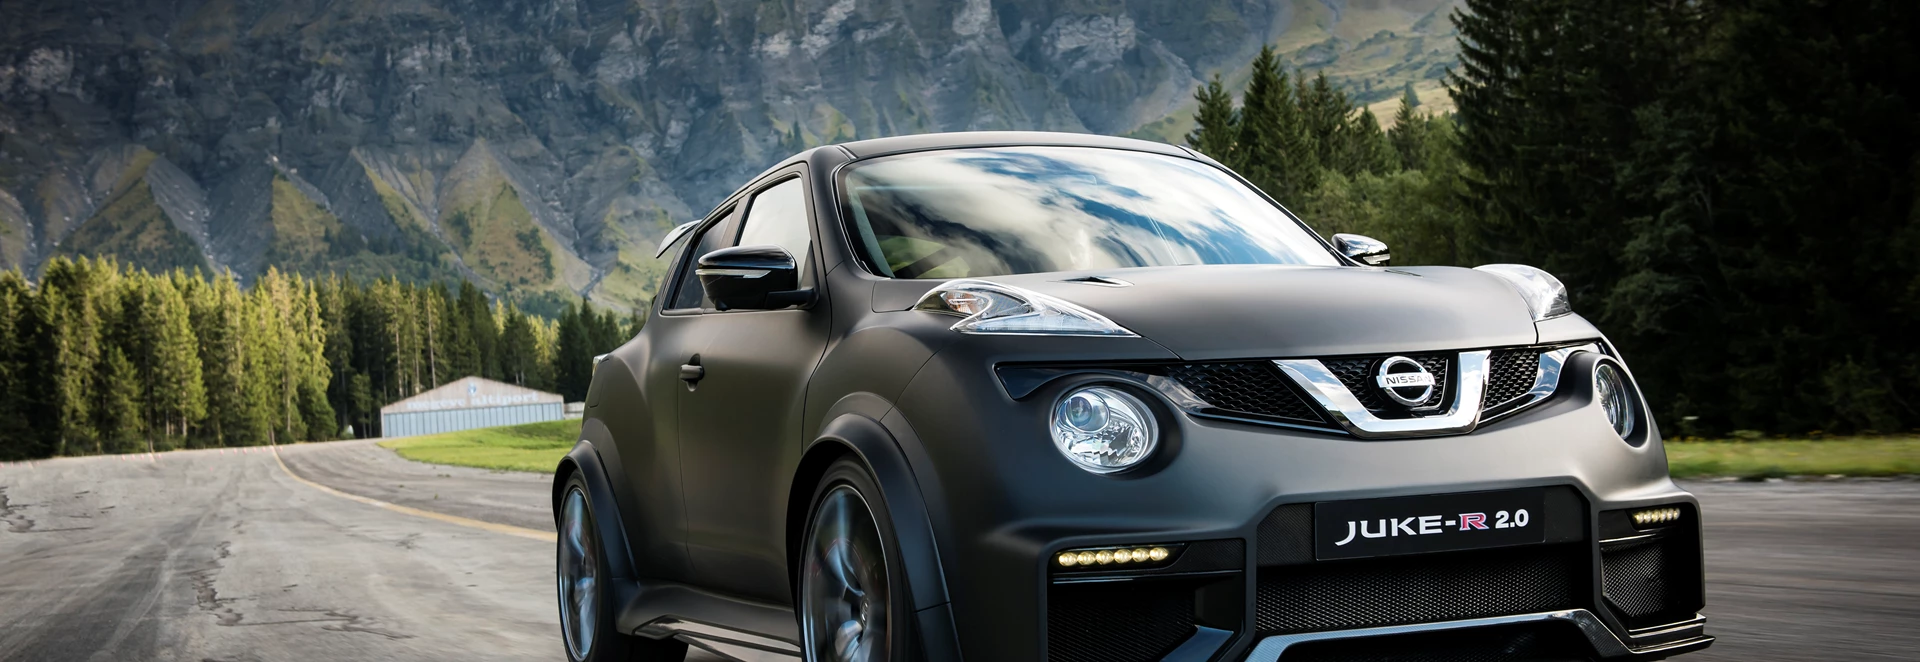 Nissan let me hoon the Juke-R 2.0 and it was amazing